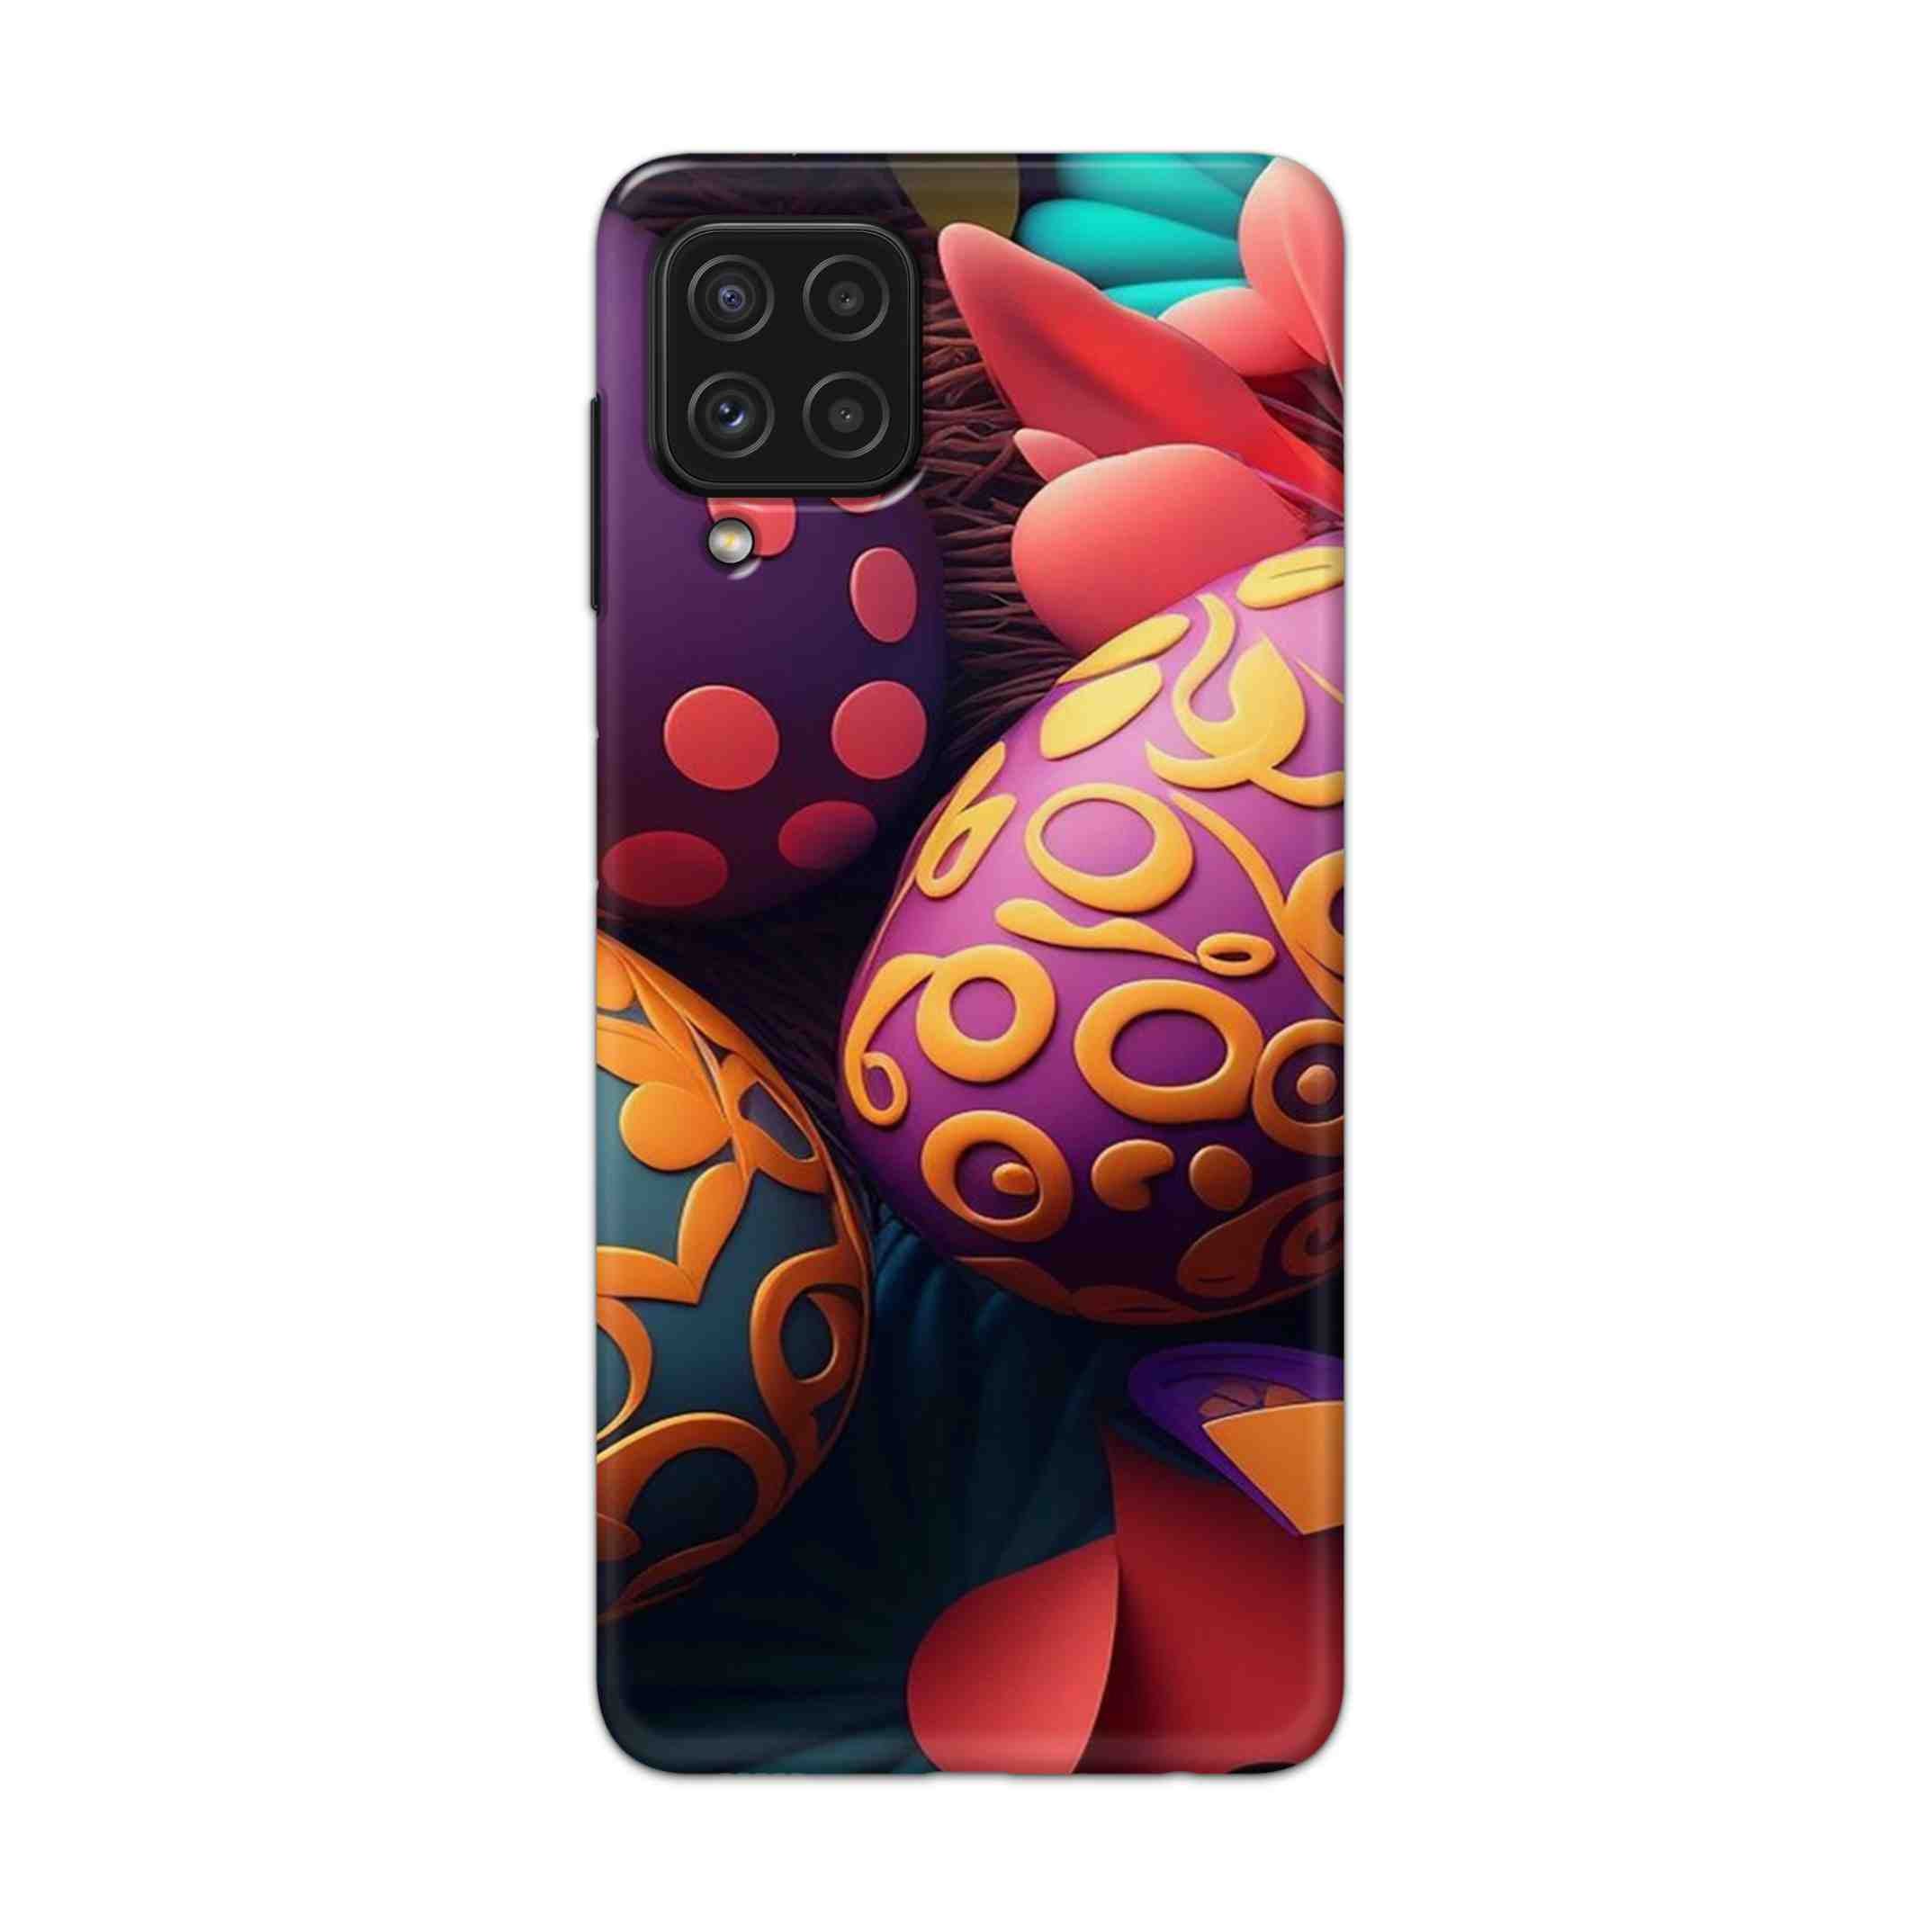 Buy Easter Egg Hard Back Mobile Phone Case Cover For Samsung Galaxy A22 Online